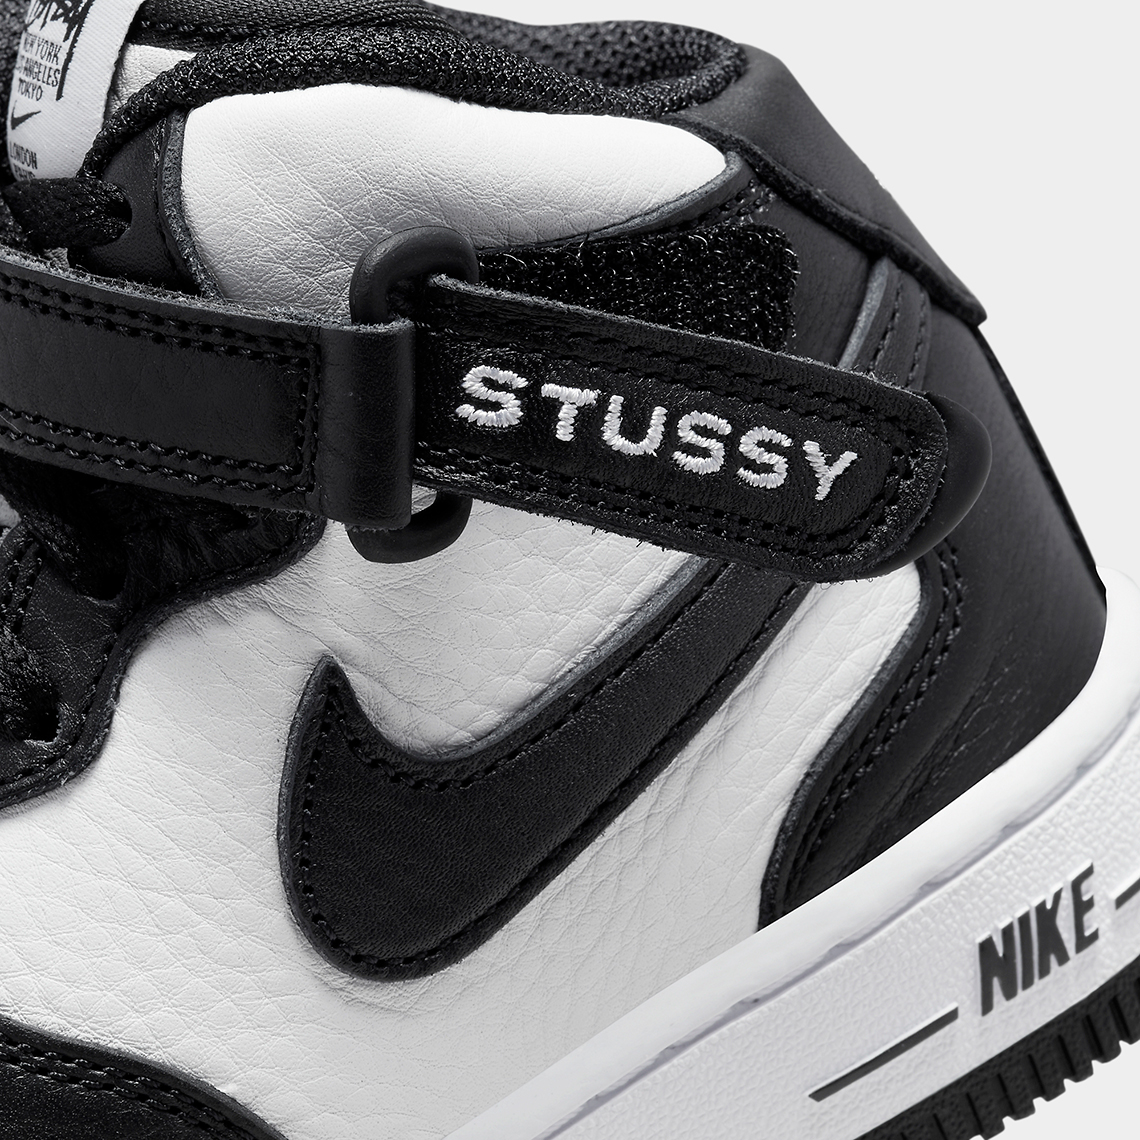 Stussy Nike Air Force 1 Mid Kids Sizes Release Info | SneakerNews.com